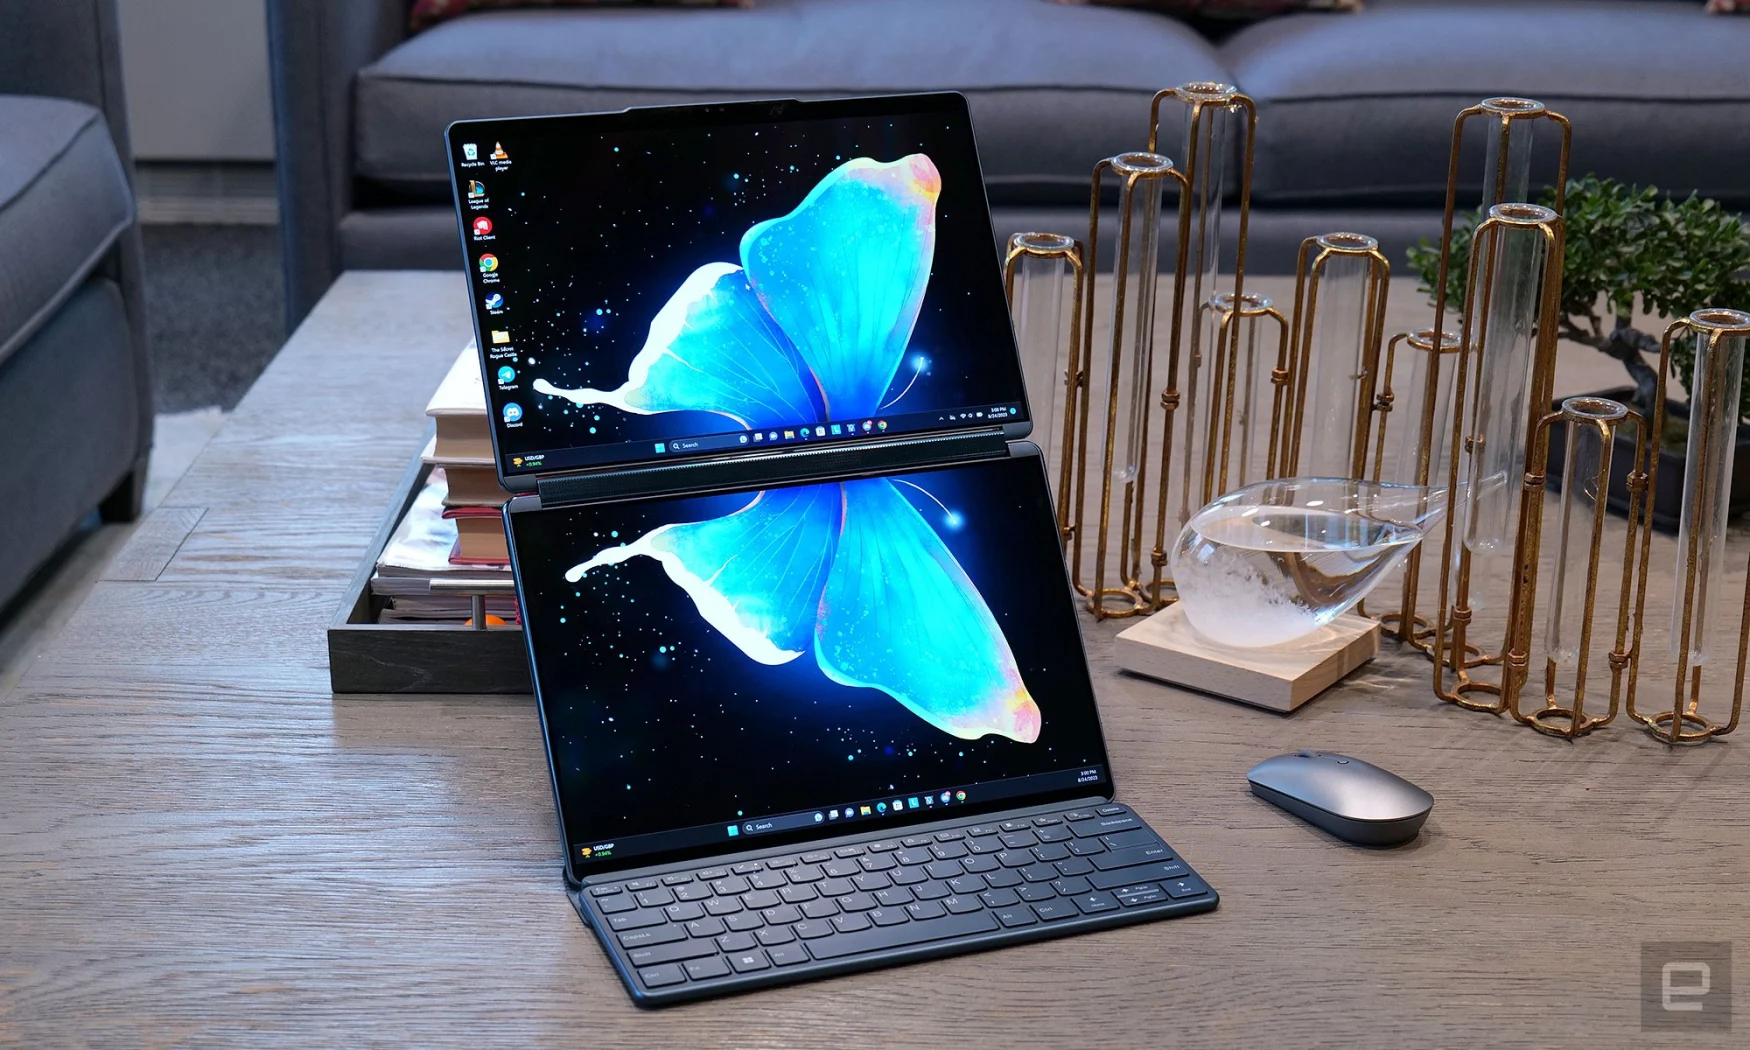 The Yoga Book 9i's stacked display setup might be its most useful mode, as it lets you keep a big project open up top while reserving the bottom screen from email, messaging and more. 